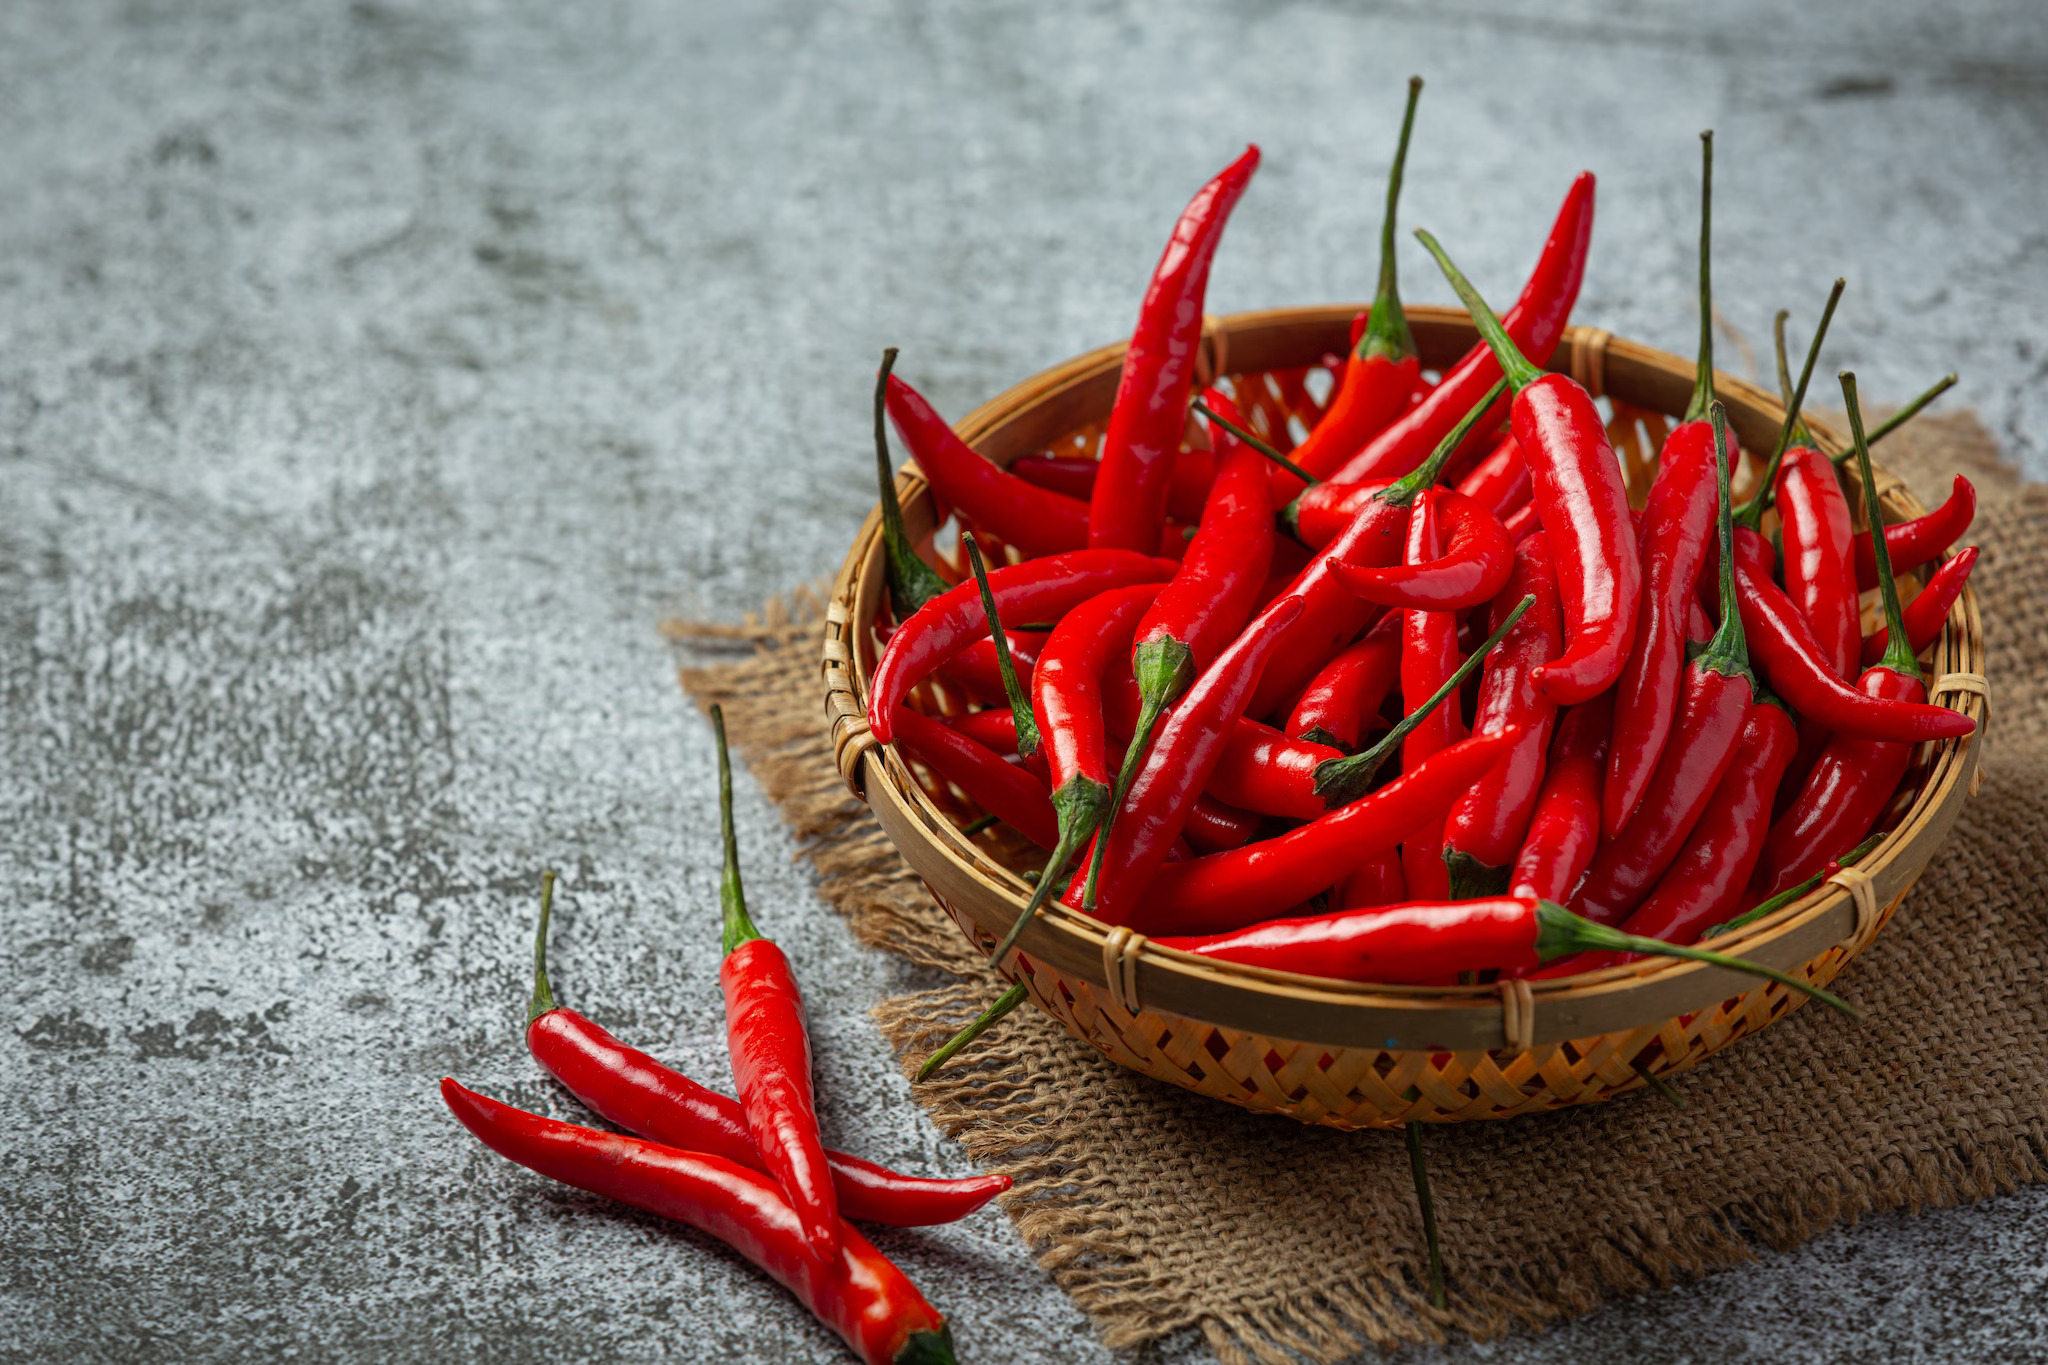 Wellhealthorganic.com:red-chilli-you-should-know-about-red-chilli-uses-benefits-side-effects, Red chilli, also known as chili pepper or cayenne pepper,